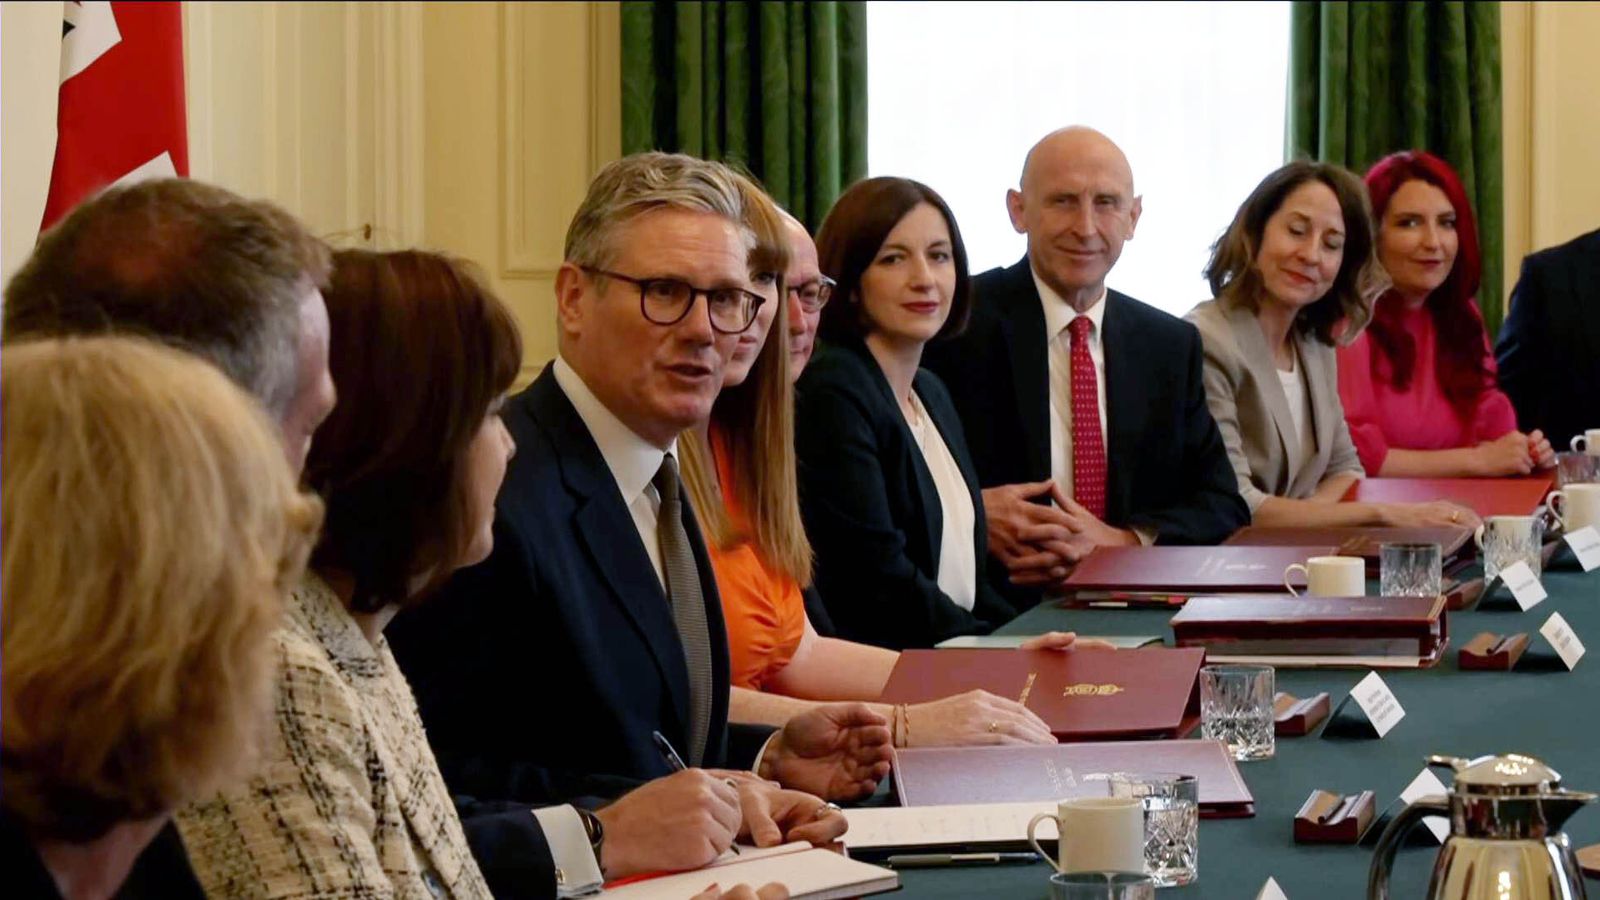 New PM Sir Keir Starmer holds first cabinet meeting after landslide victory | Politics News